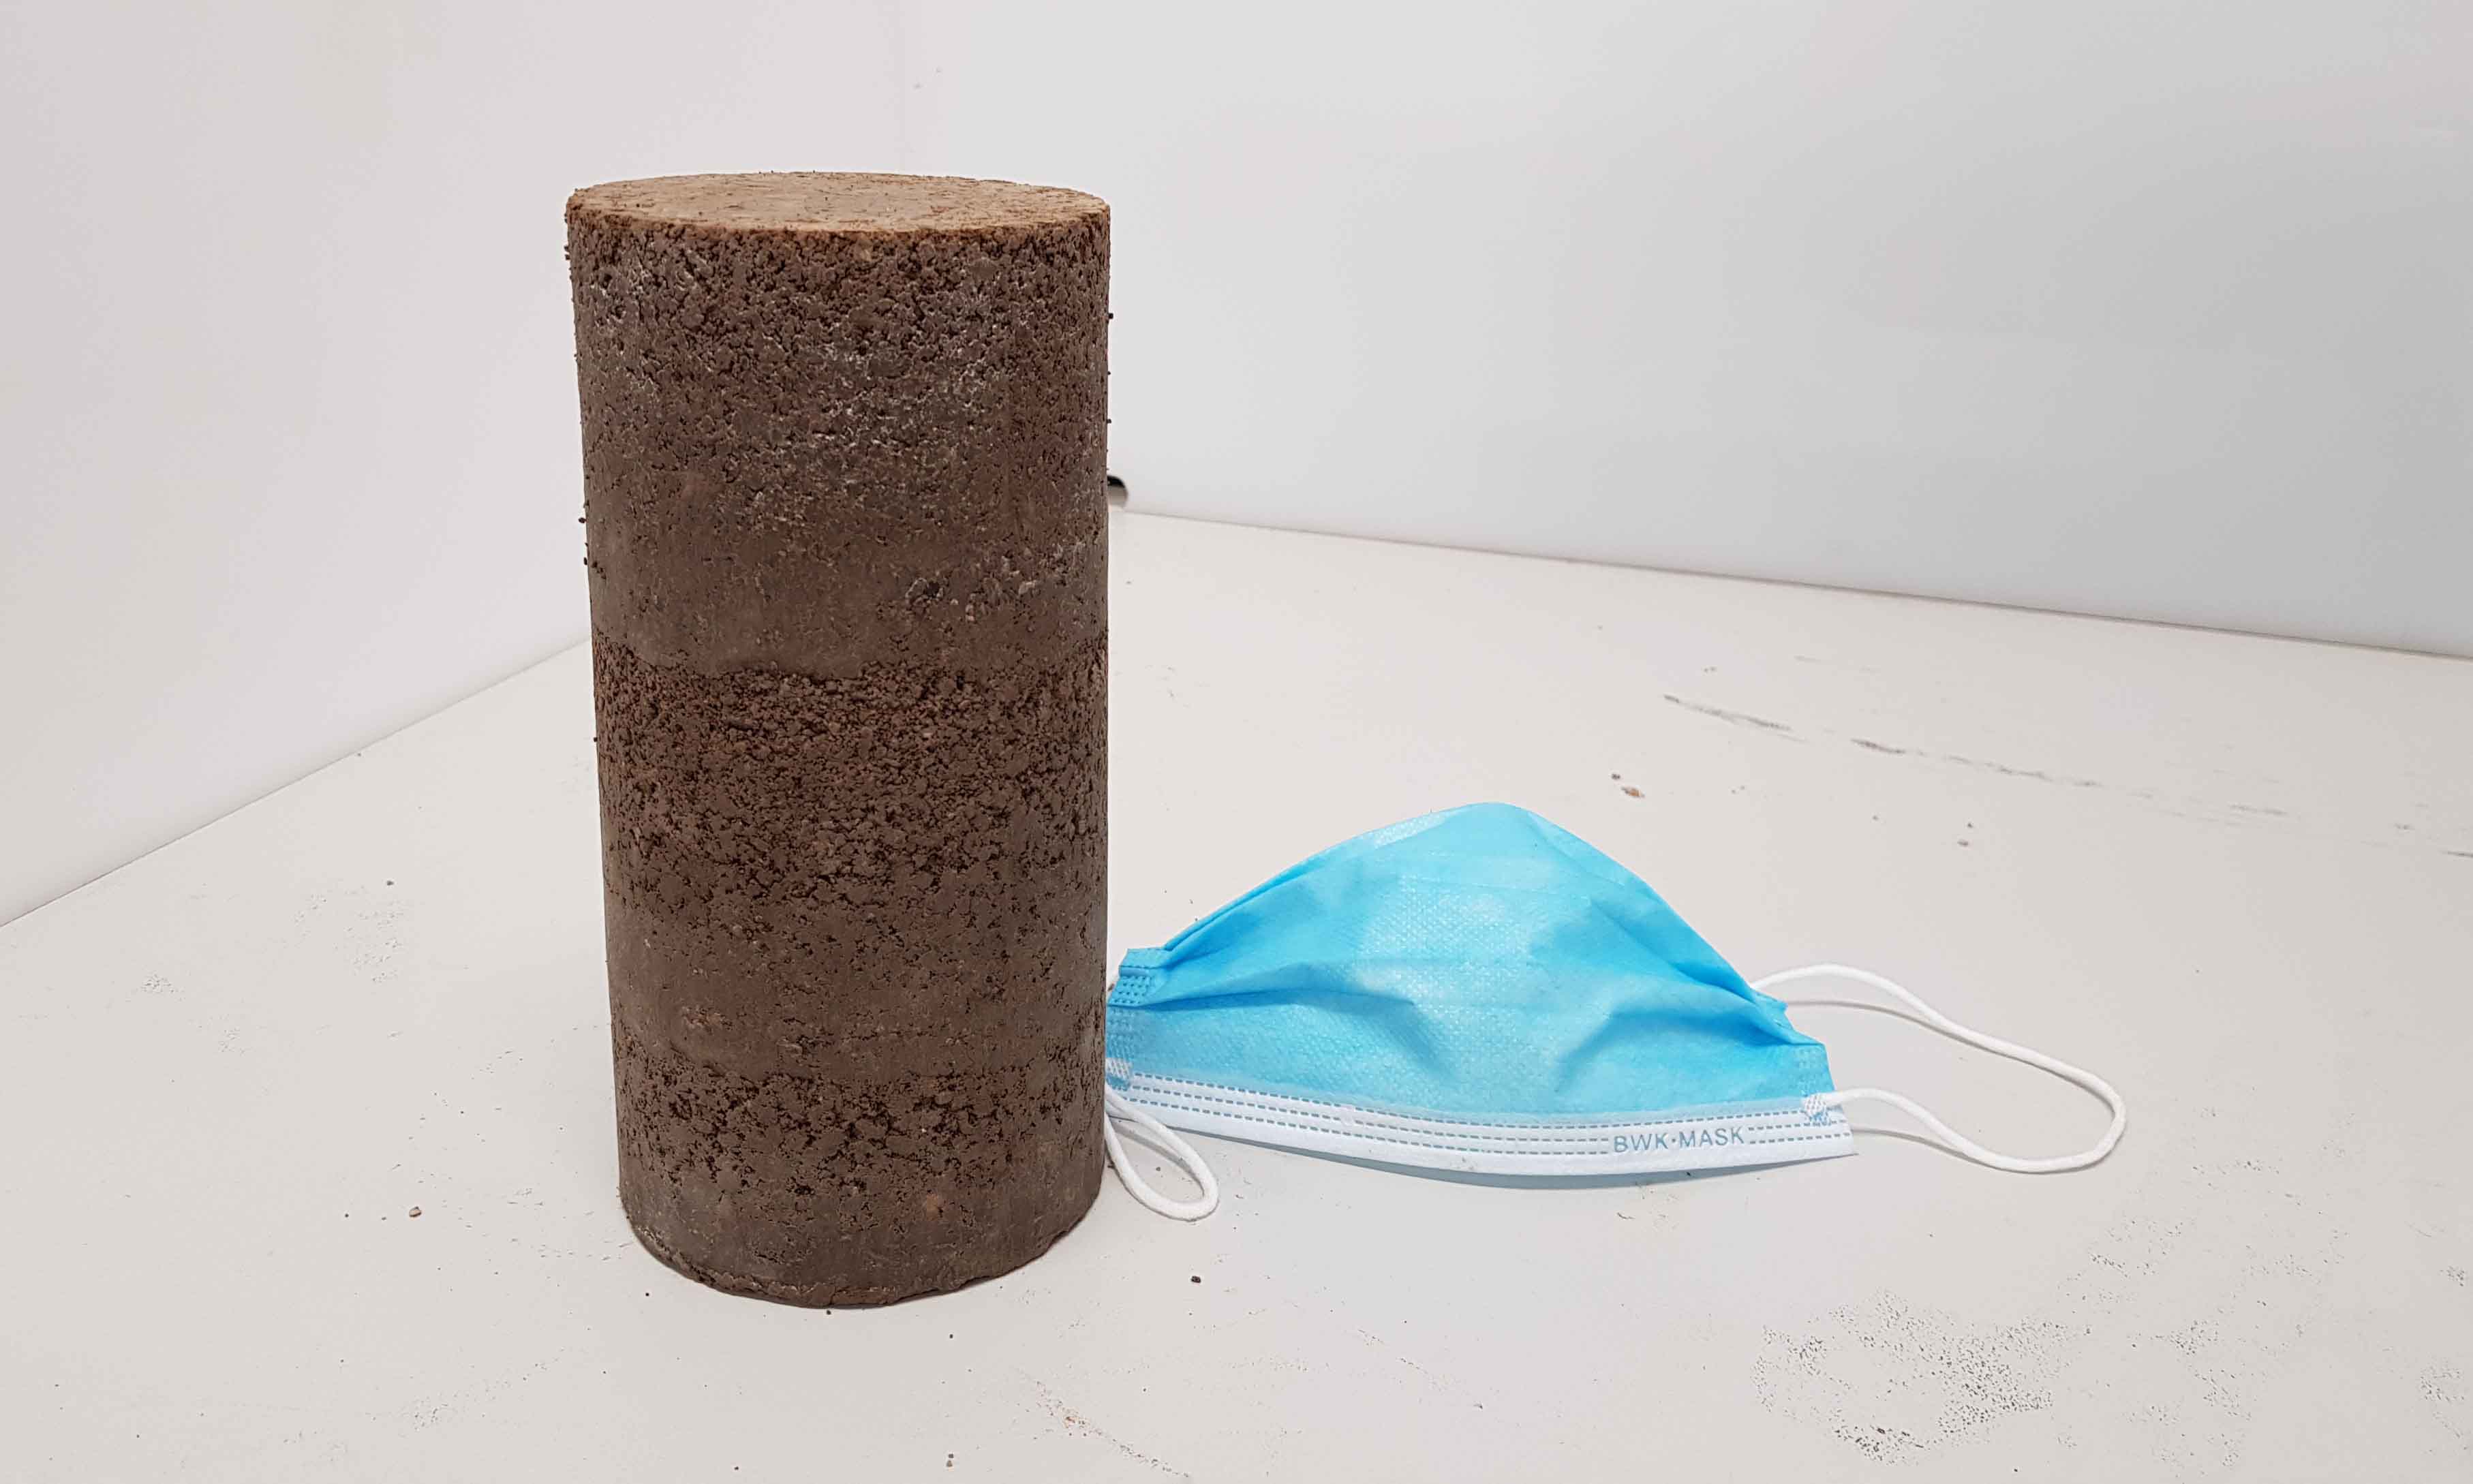 A sample of the recycled road-making material, next to a single-use face mask